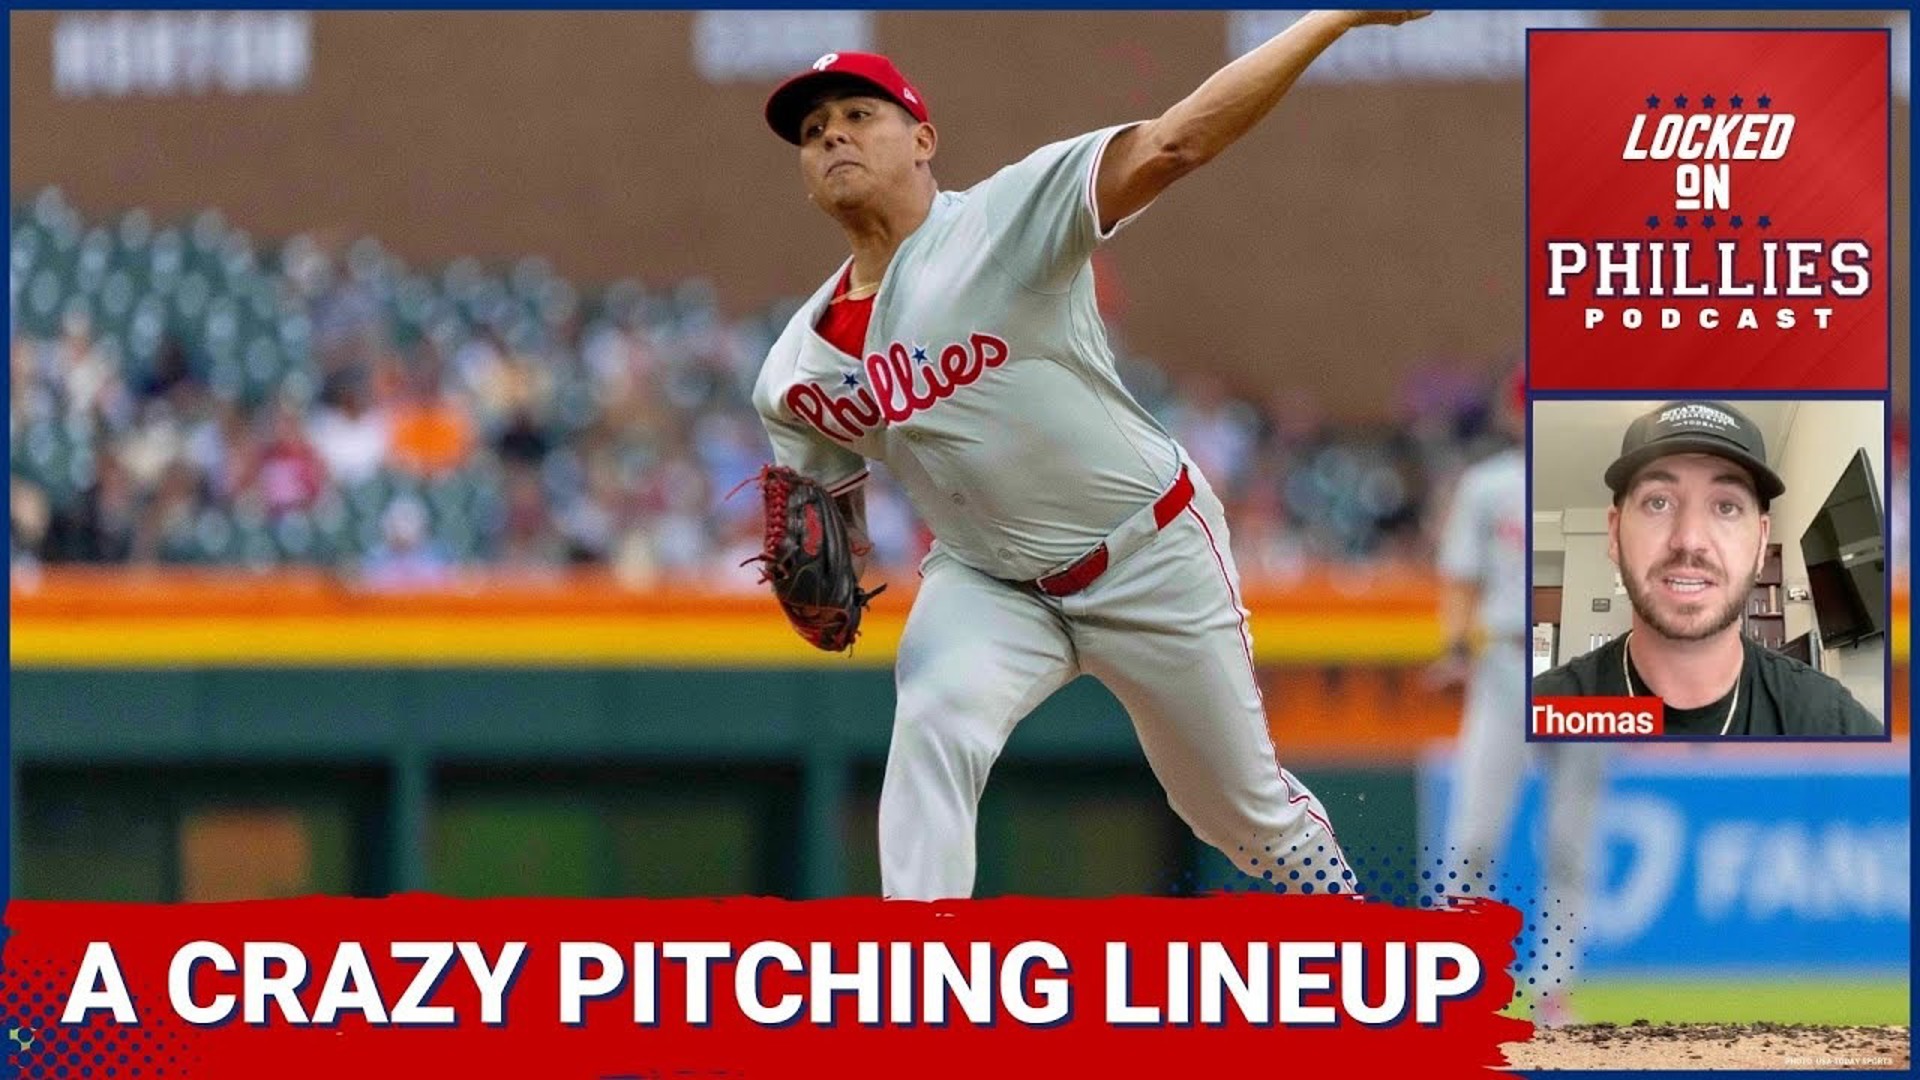 In today's episode, Connor previews the upcoming 4 game series between the Philadelphia Phillies and the Miami Marlins.